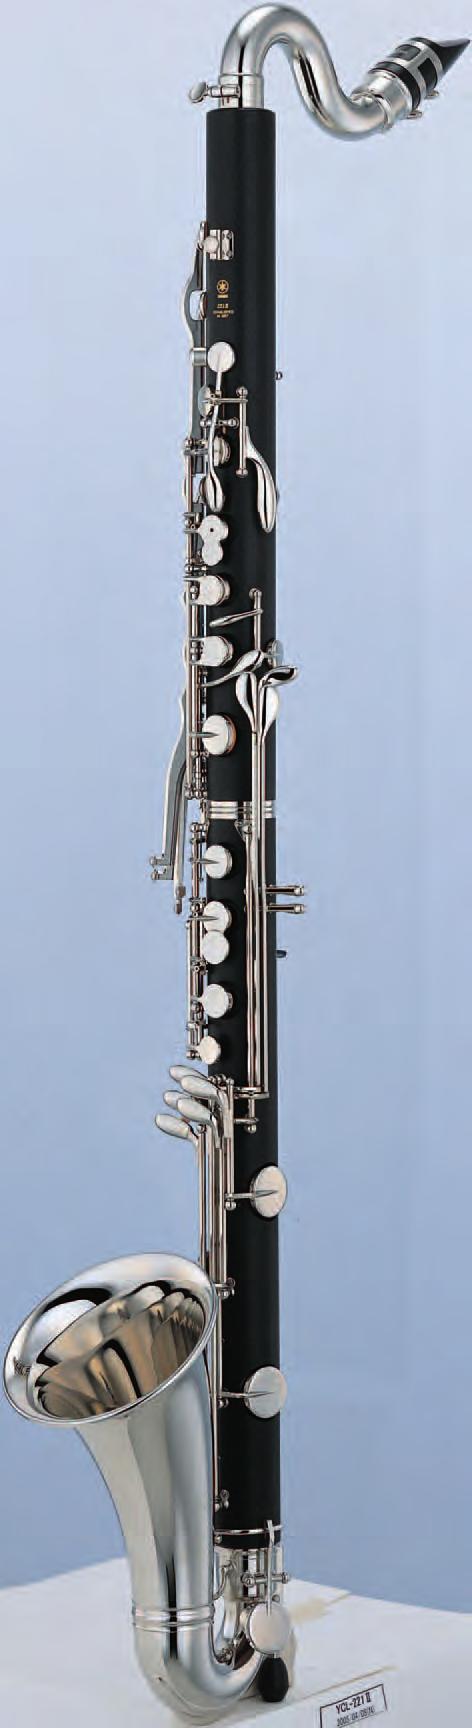 Bass, Alto and E Clarinets Yamaha s top-of-the-line bass clarinet, which can play down